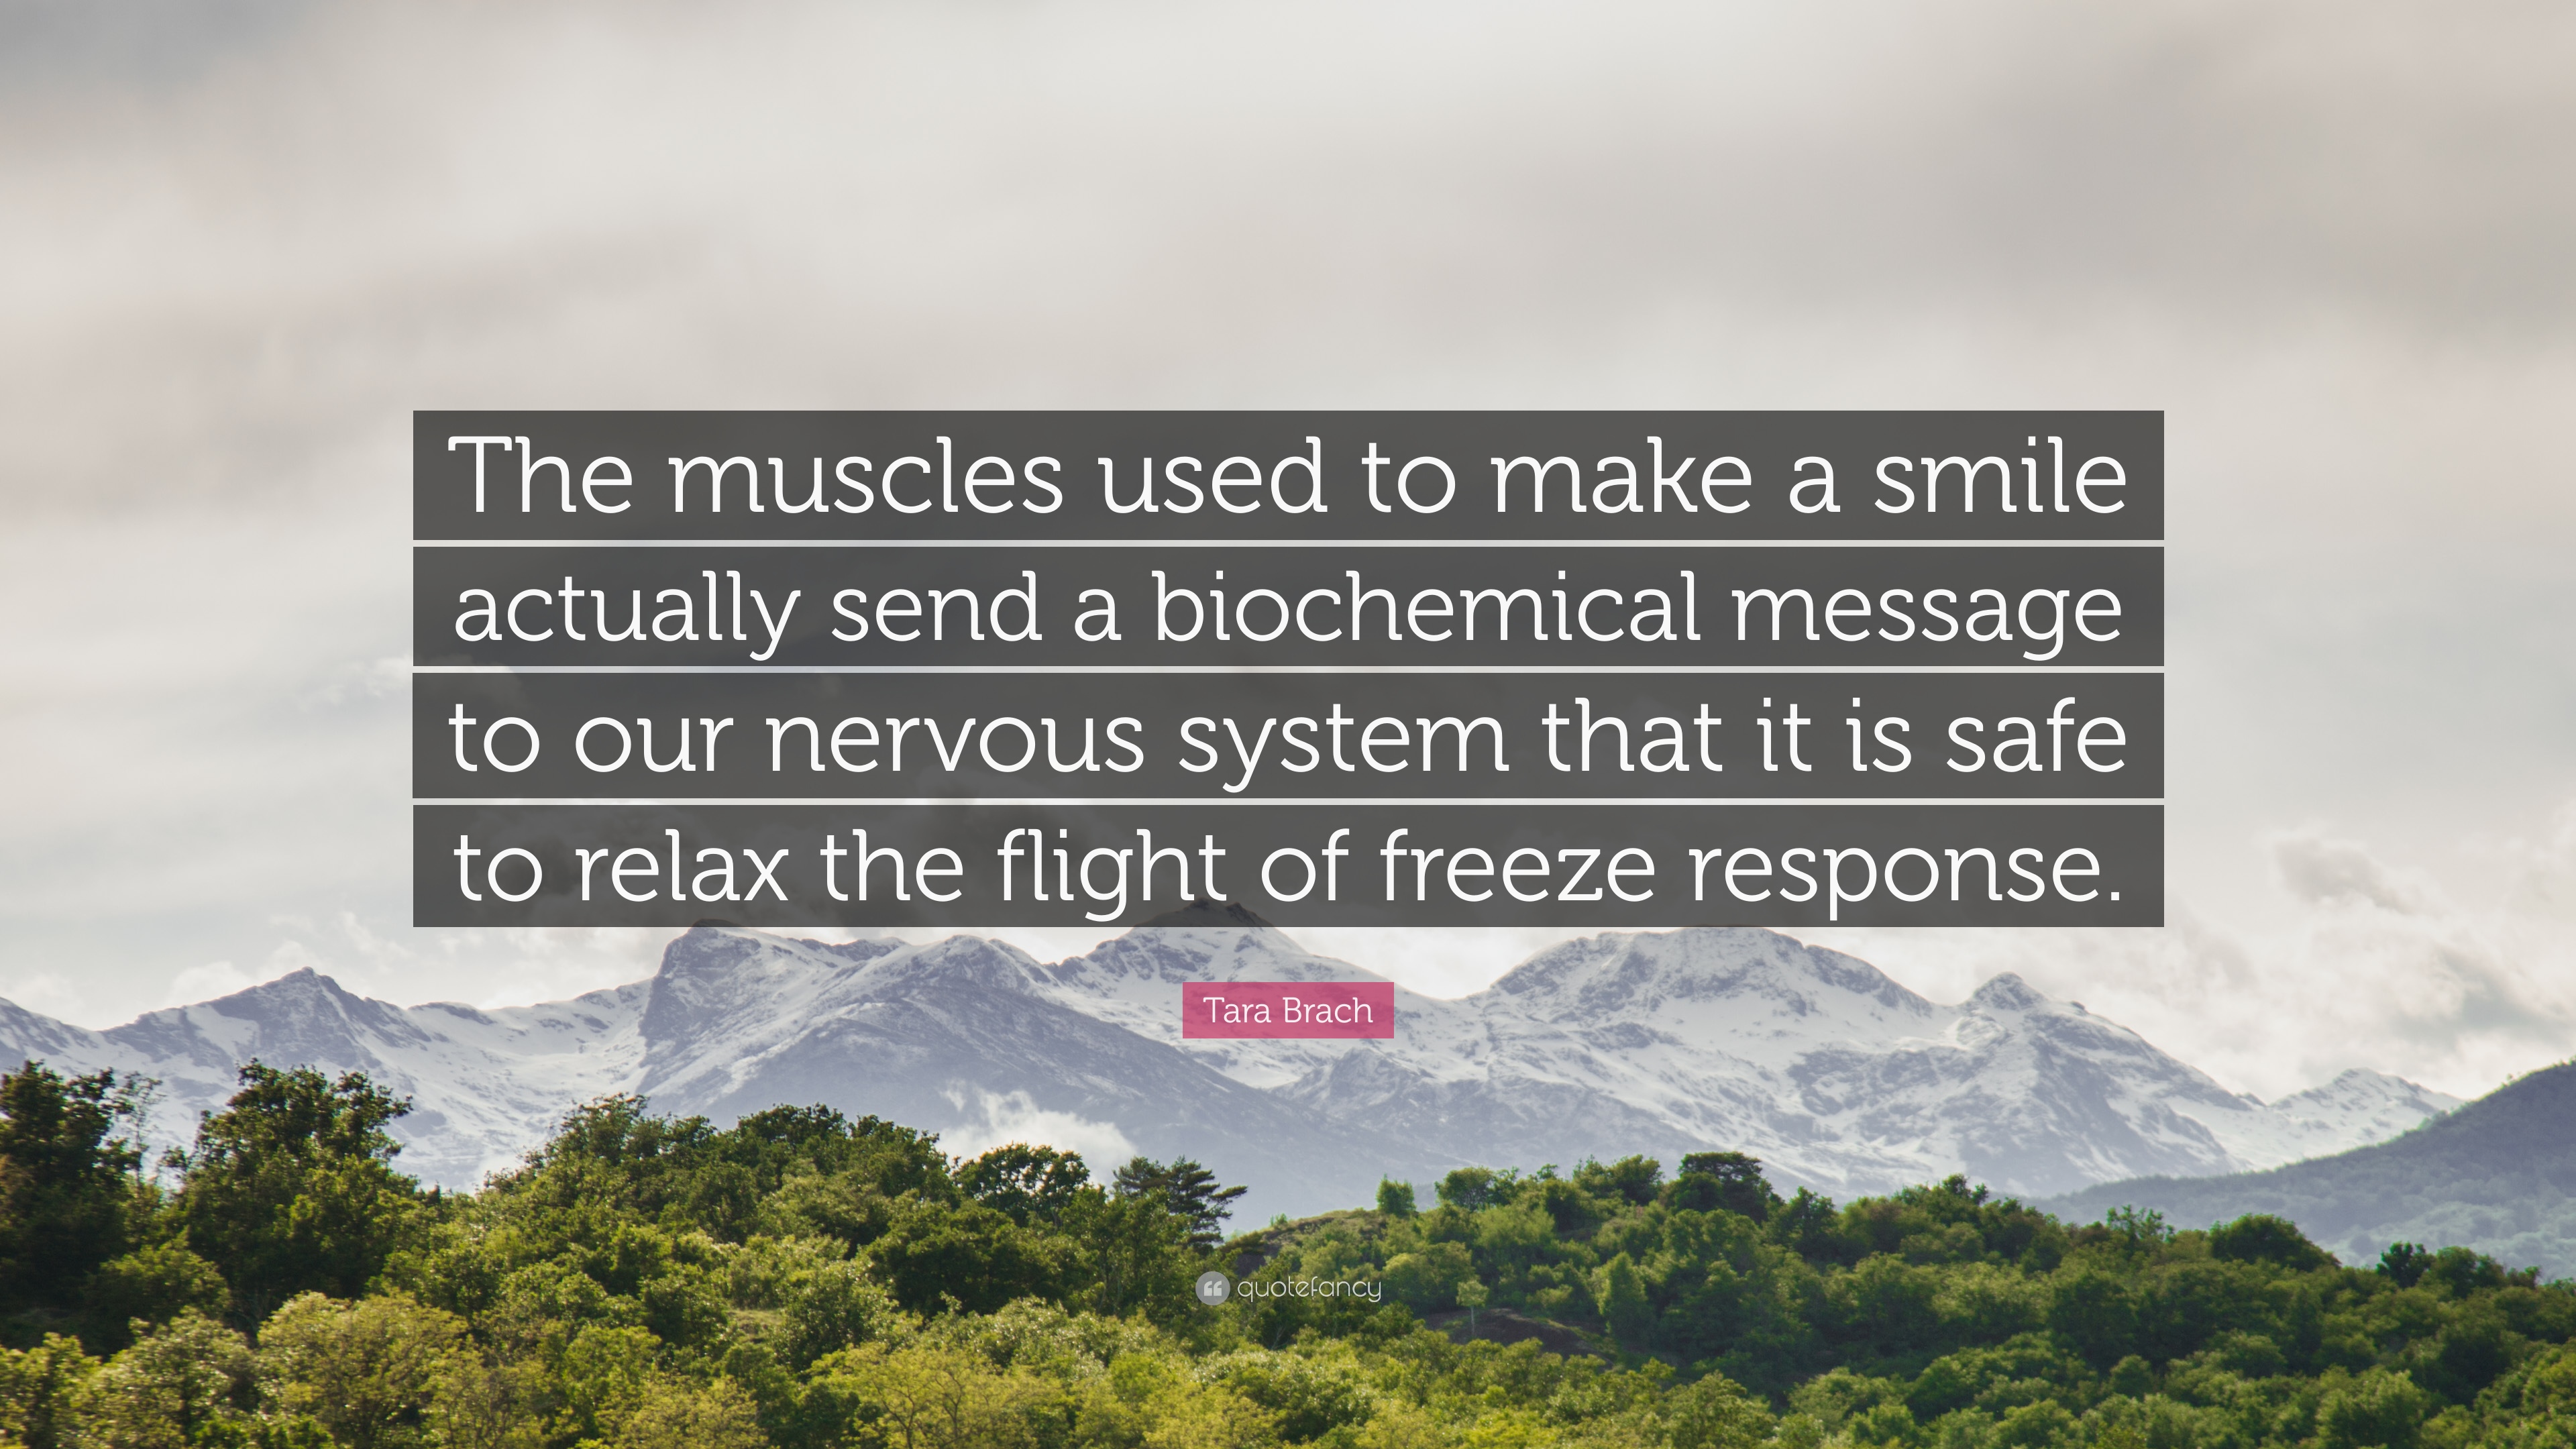 Tara Brach Quote: “The muscles used to make a smile actually